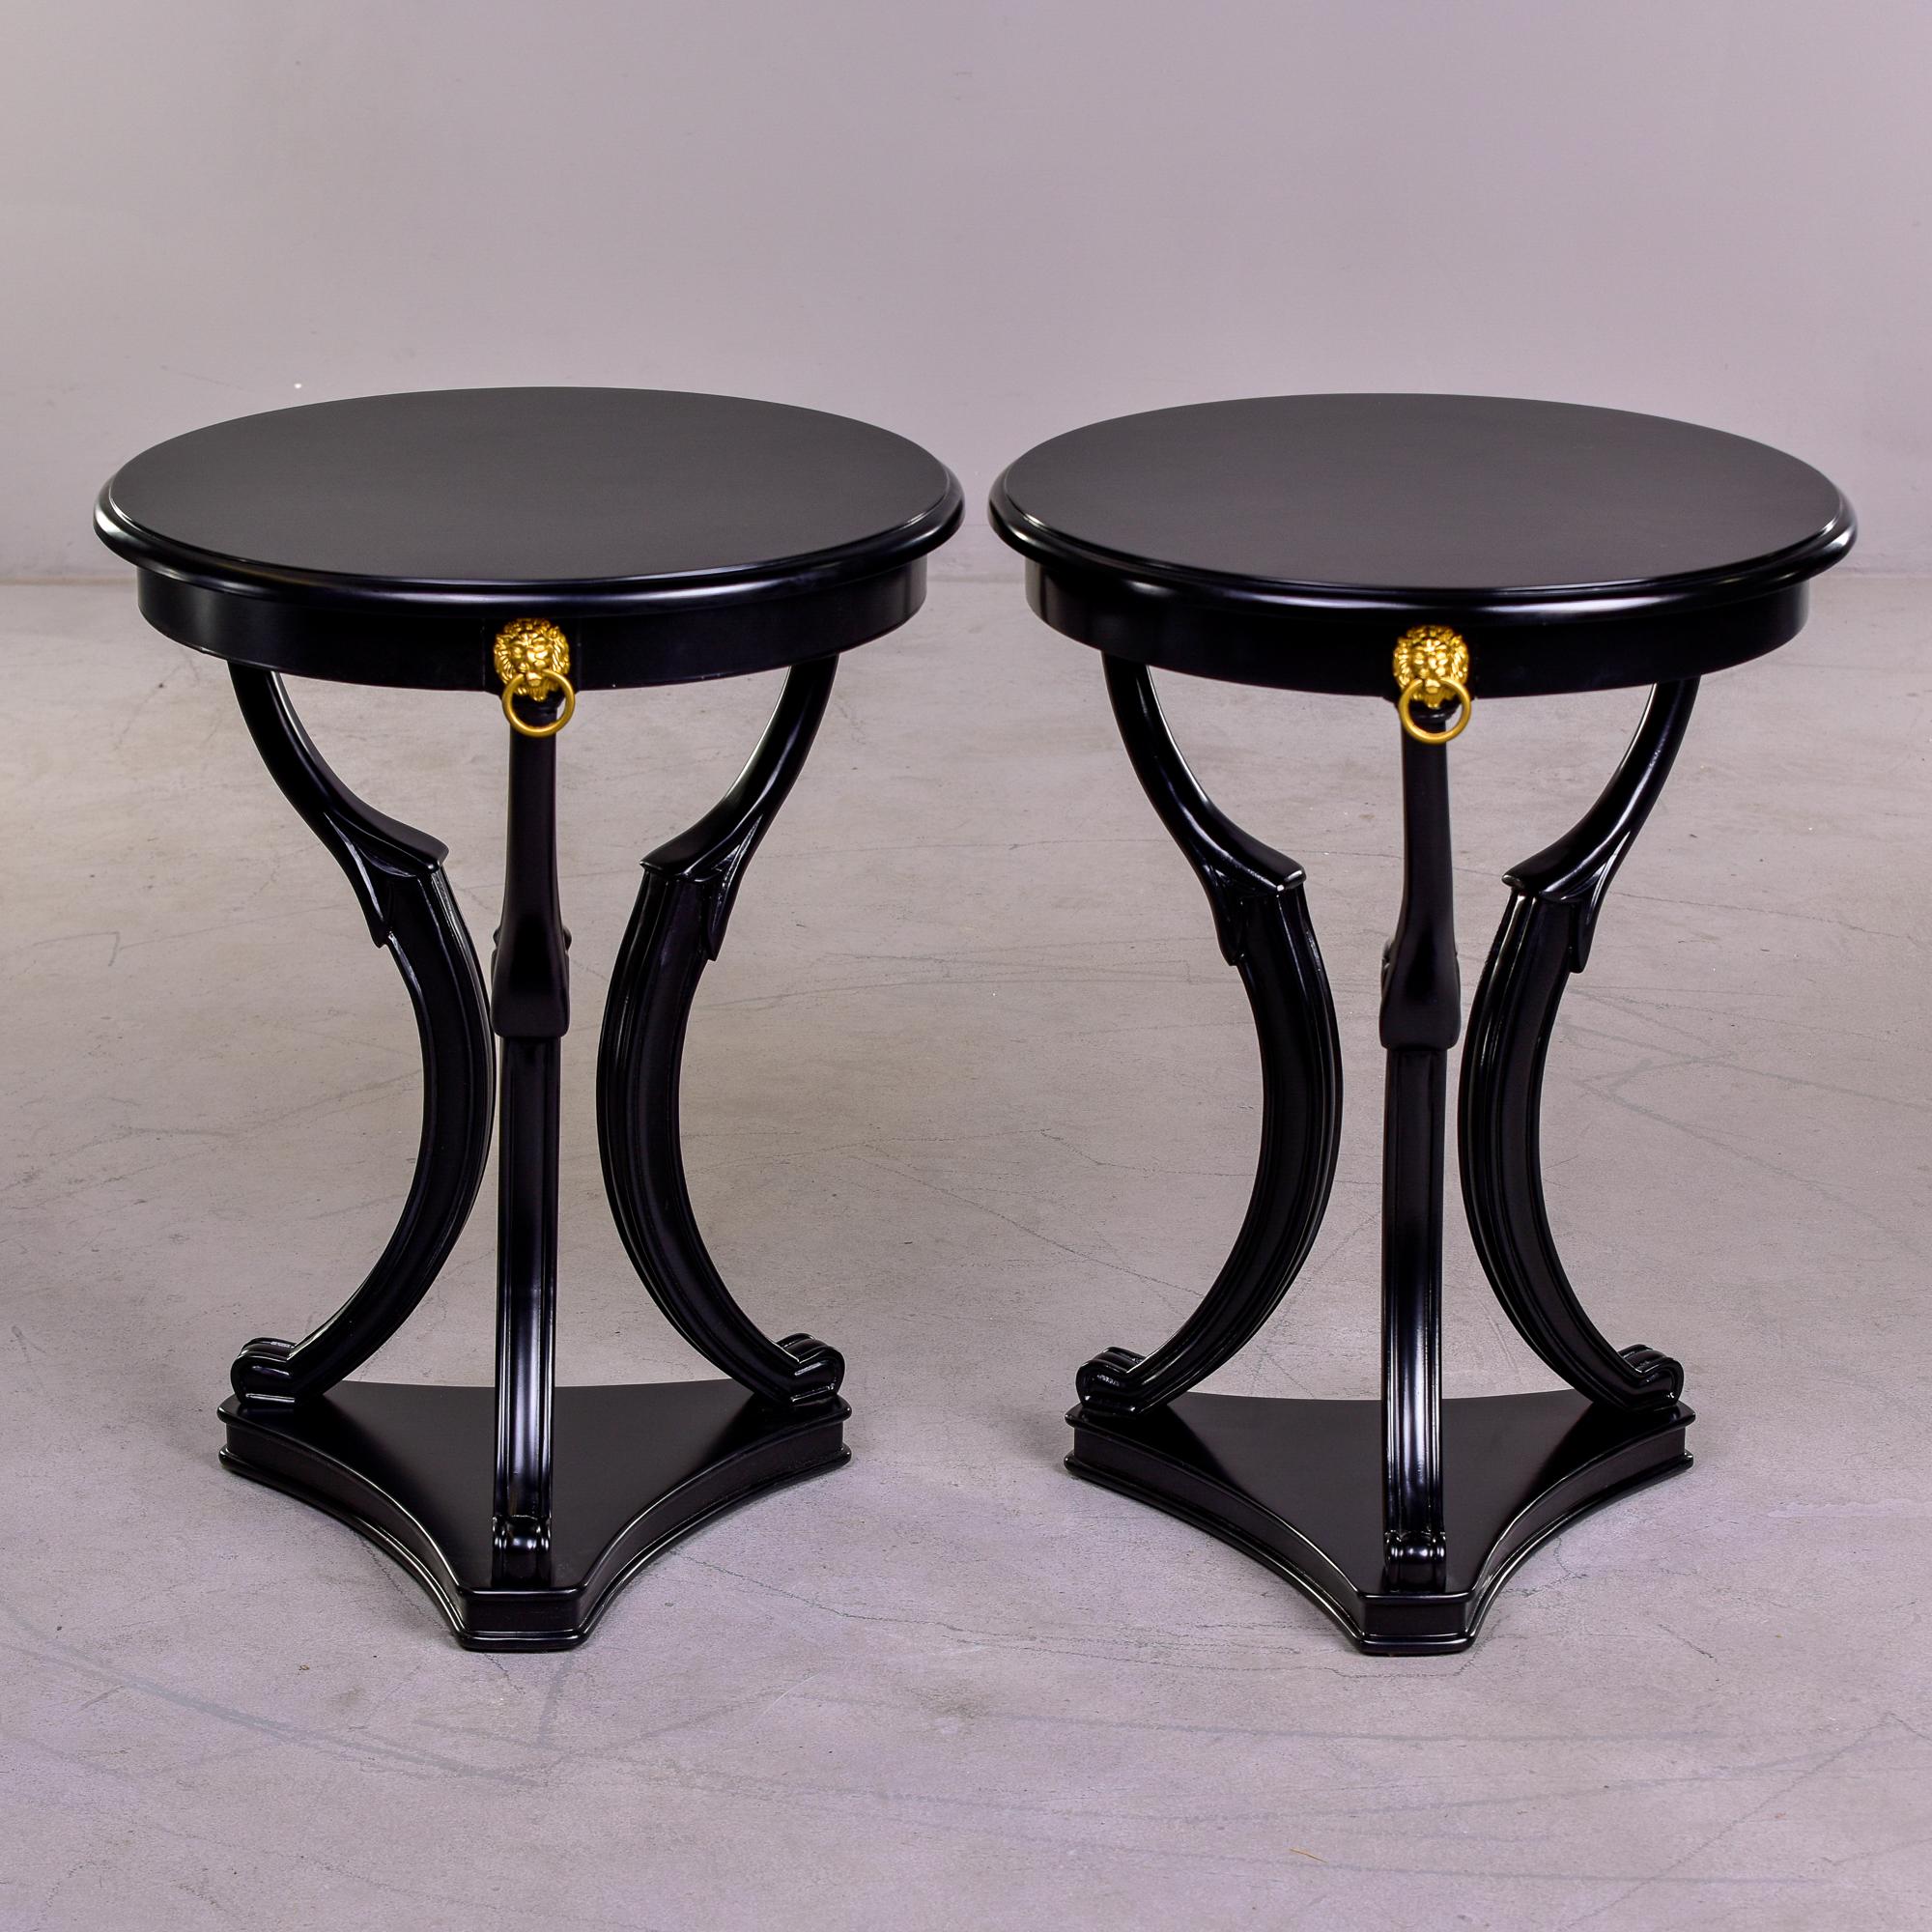 Pair of circa 1920s French neoclassical style guerdon side tables with new black painted finish, triangular base, three carved and curved legs, round tops and decorative gold lion’s head mounts. Unknown maker. Sold and priced as a pair.
 